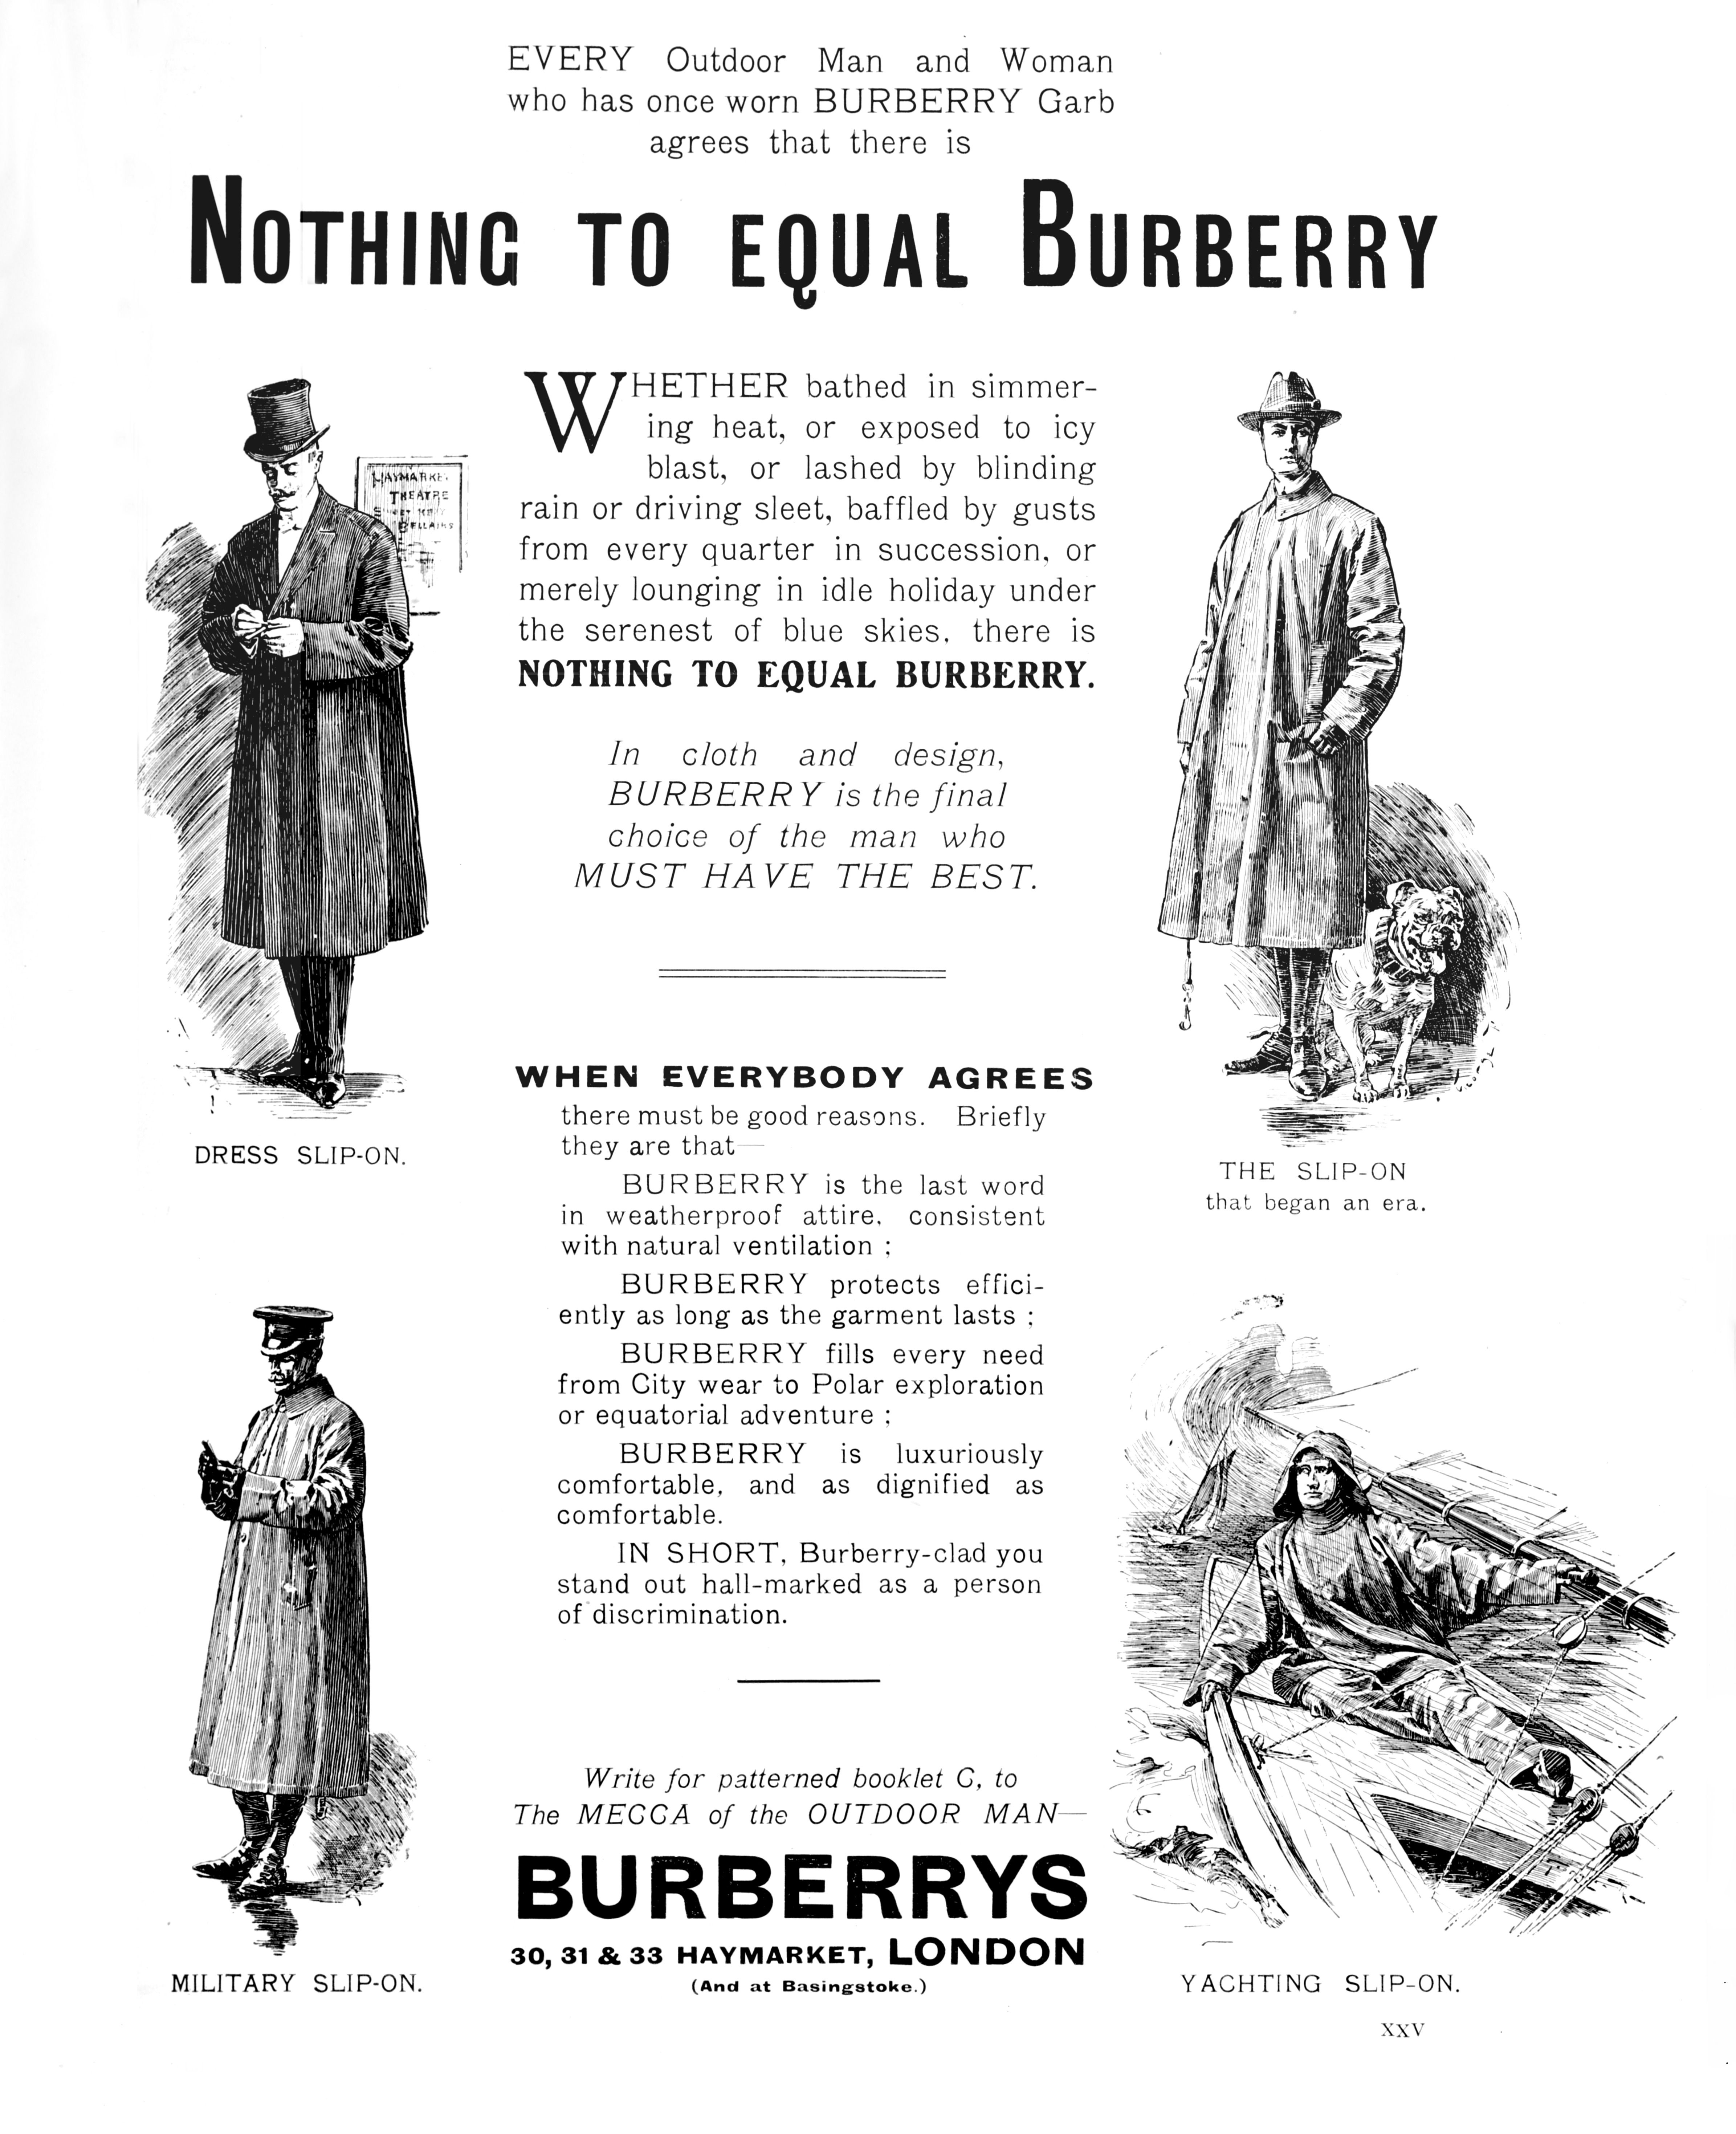 How Burberry Came to Define British Identity